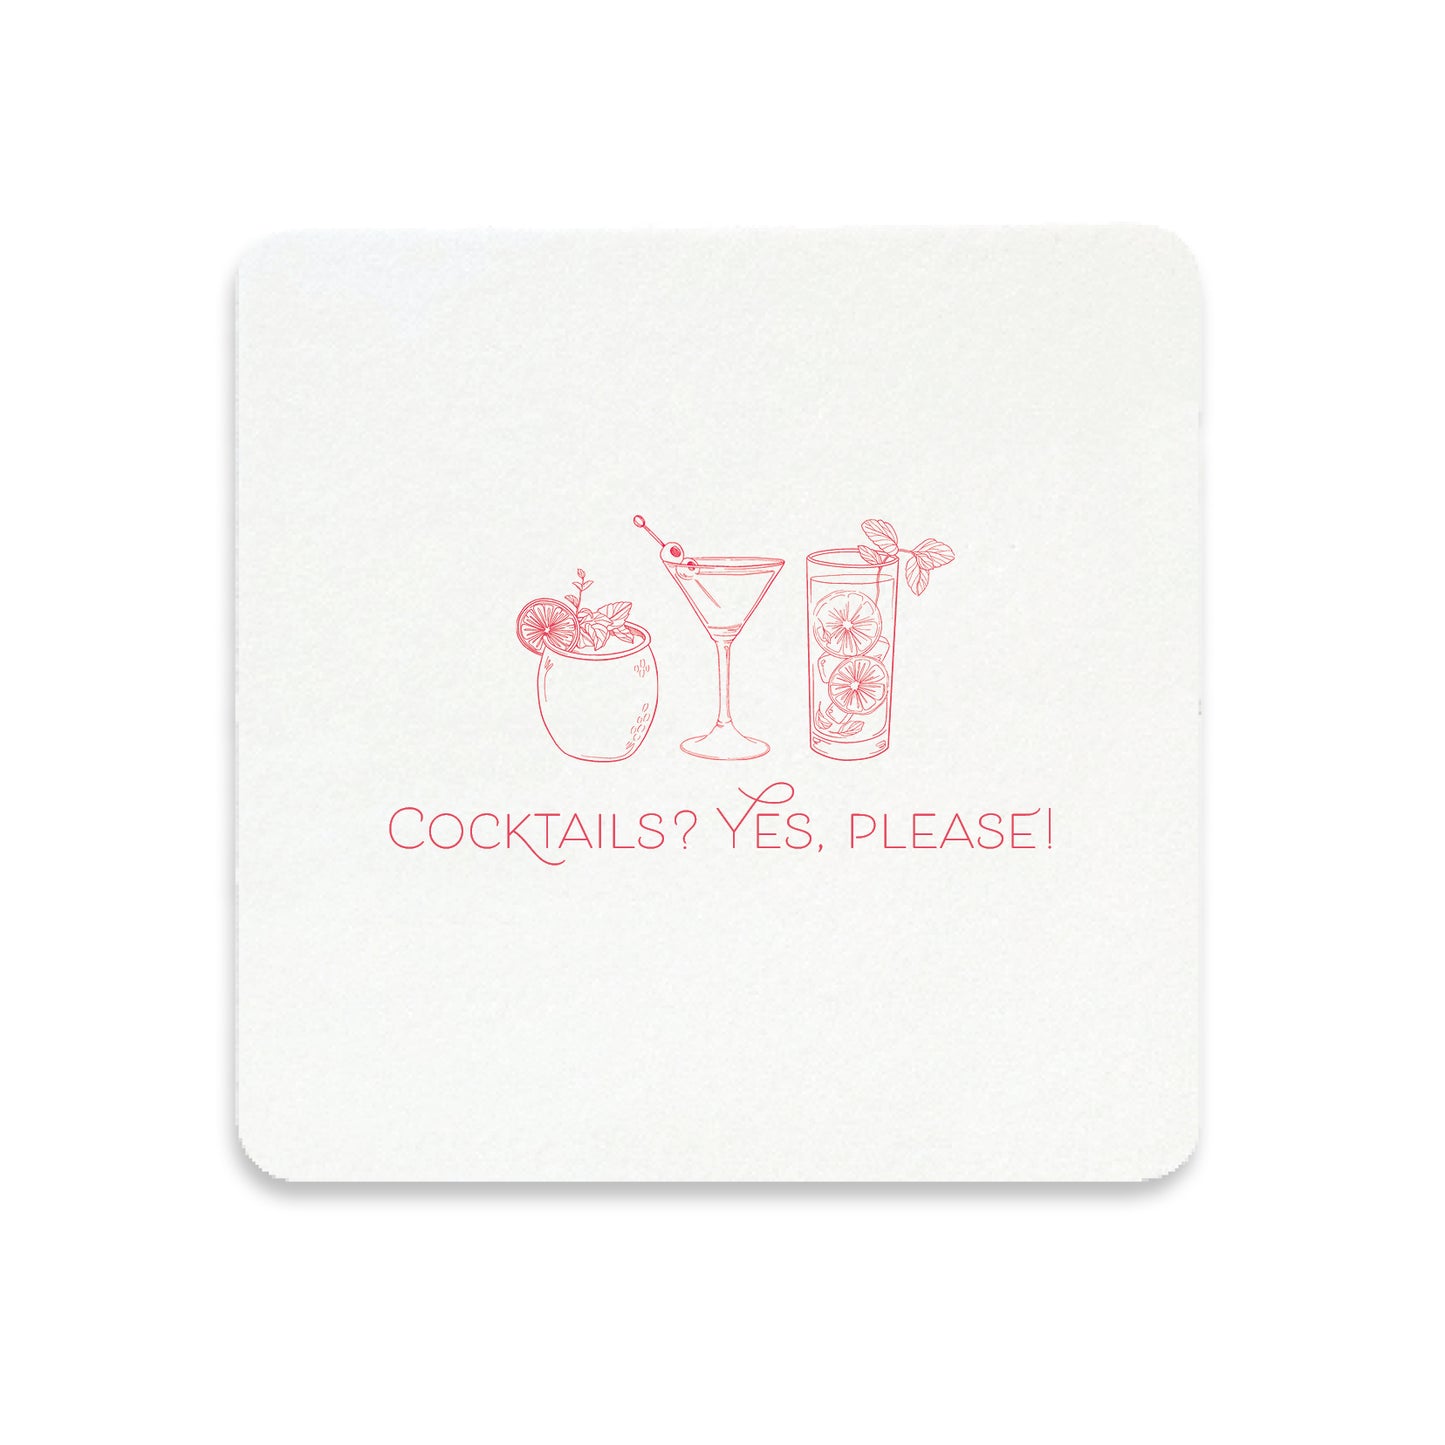 Cocktail Letterpress Coasters - Pack of 4